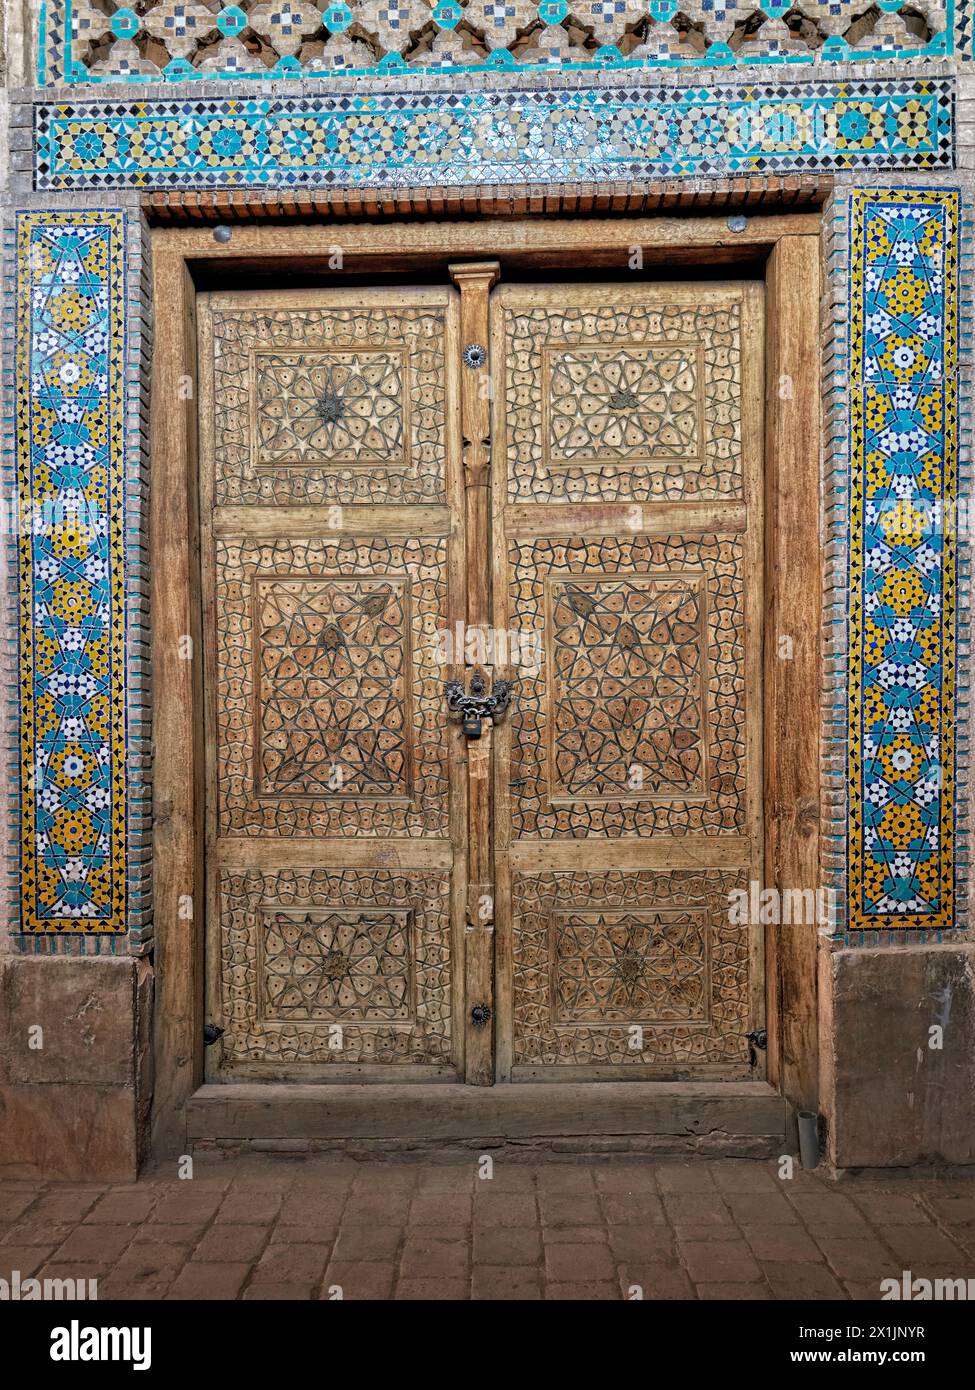 Closed old wooden door covered with intricate carvings in the Jameh Mosque of Isfahan, one of the oldest mosques in Iran. Isfahan, Iran. Stock Photo